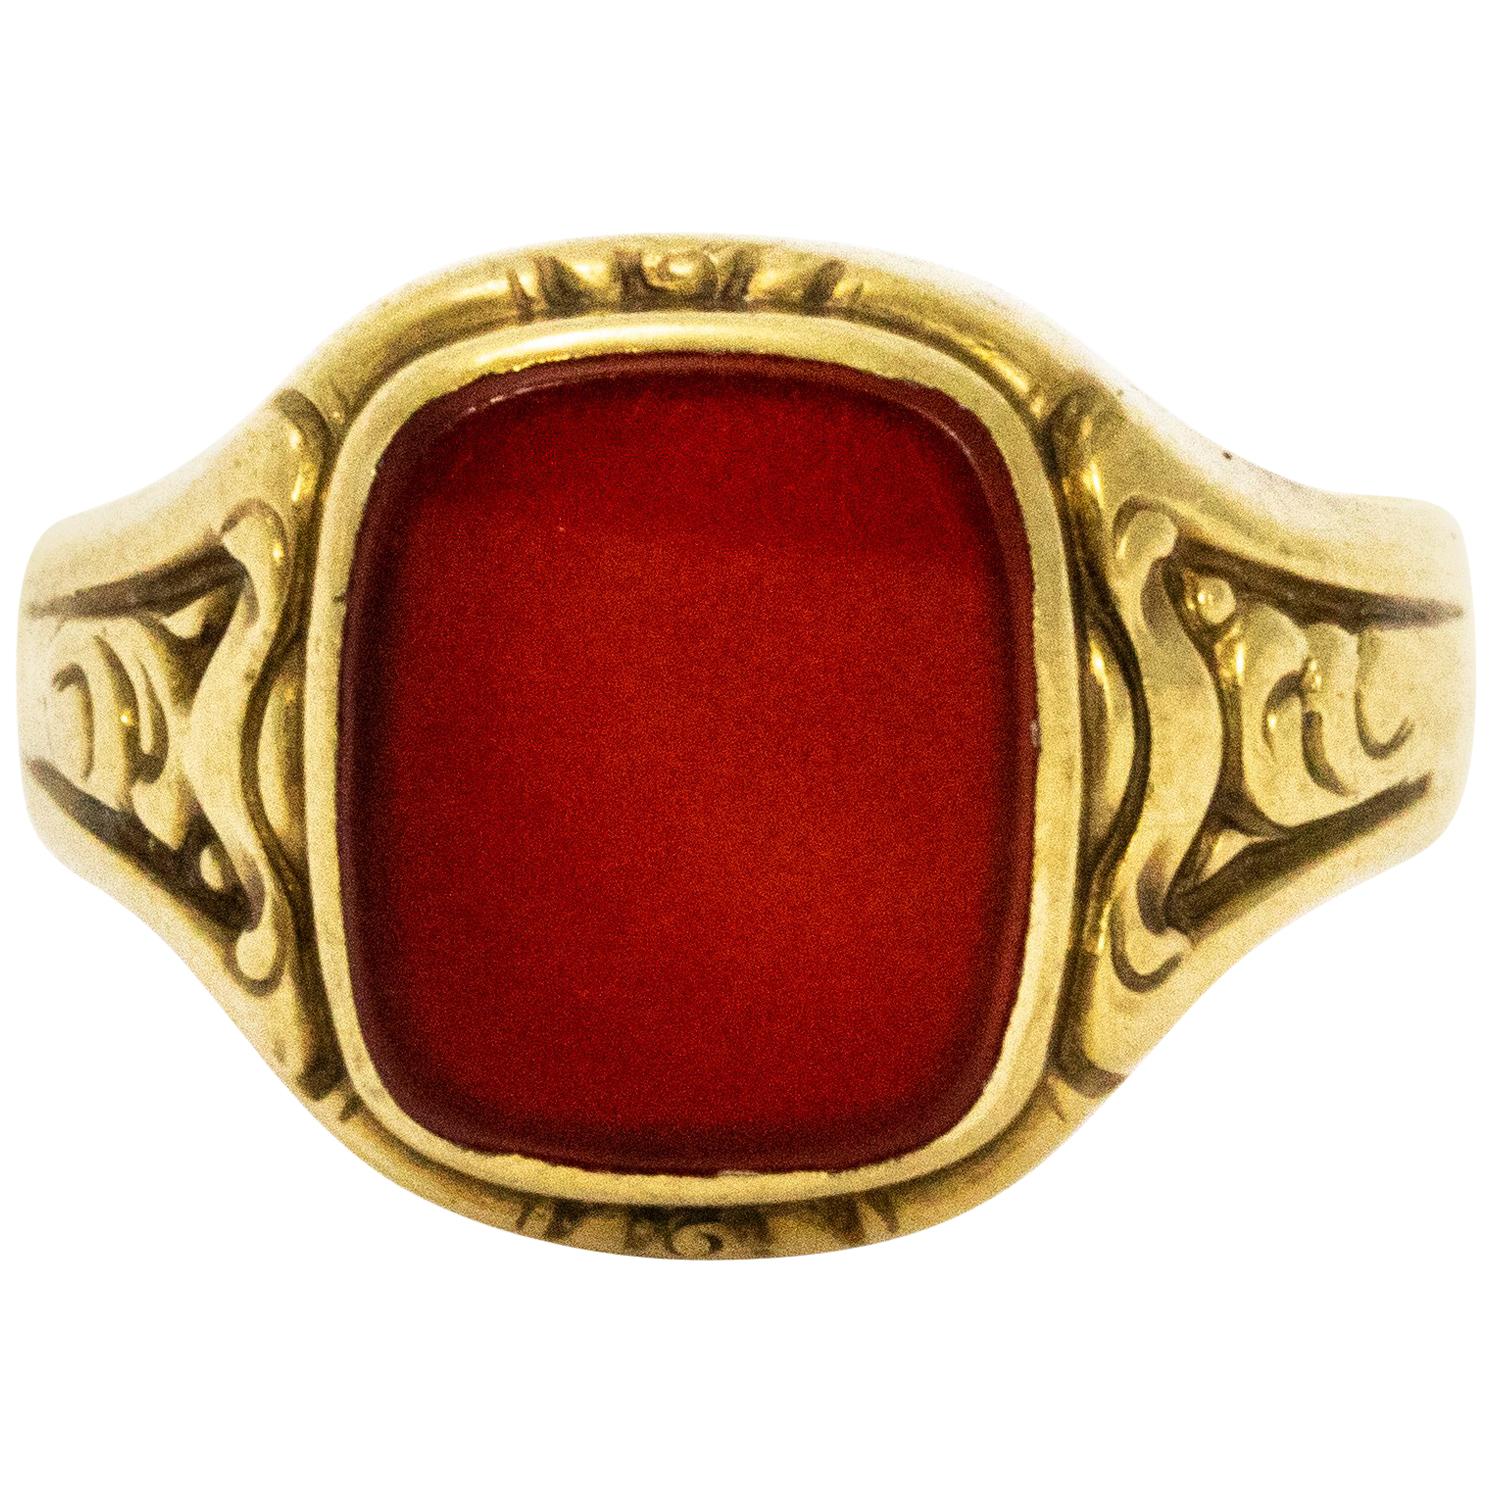 Late Victorian Carnelian and Gold Signet Ring